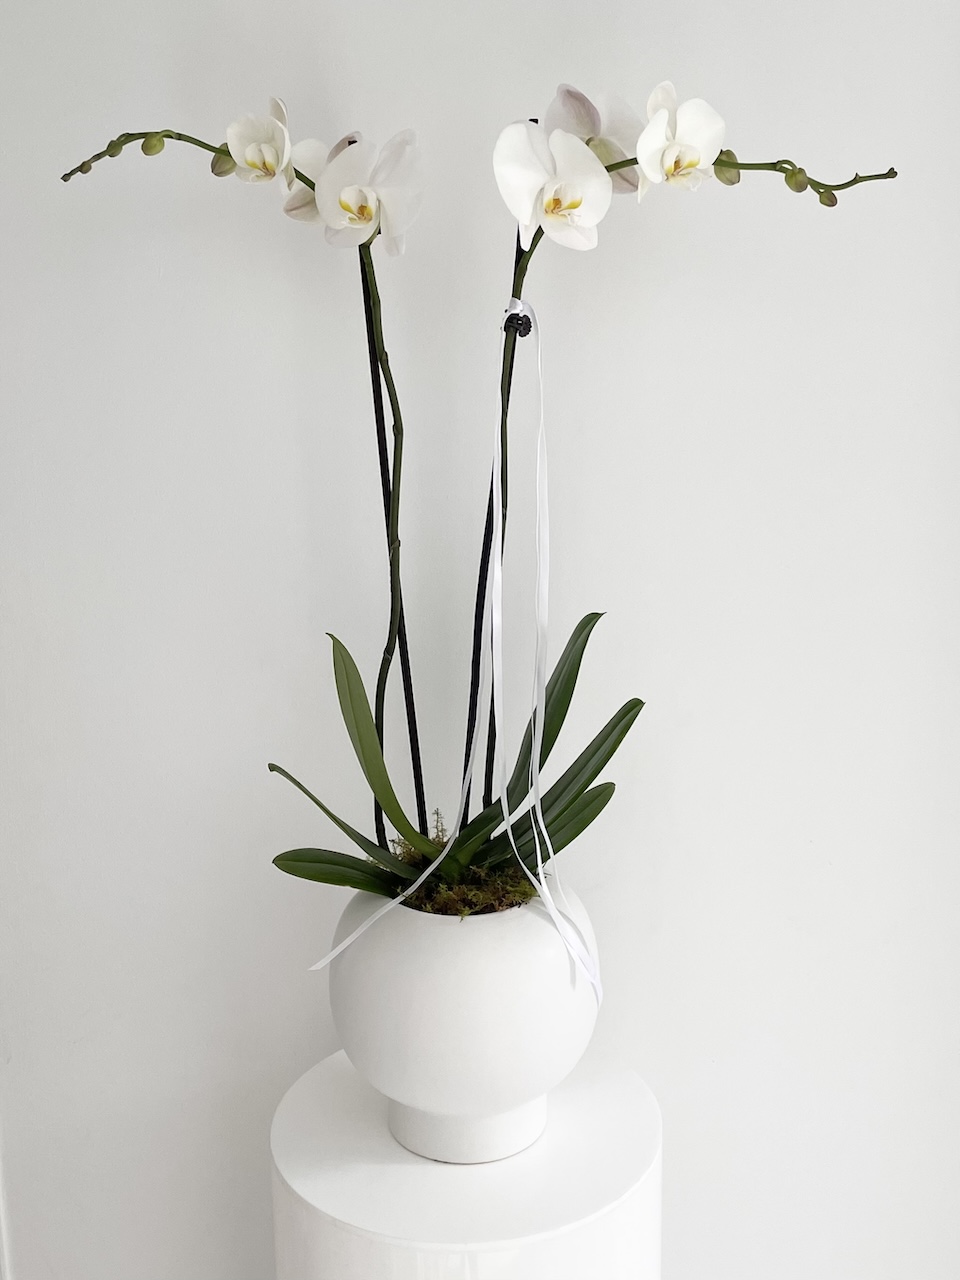 Caring for your orchid phalaenopsis orchid plants blog. Image of a LULLY &amp; ROSE Floral Studio white phalaenopsis orchid plant potted in a white fish bowl ceramic planter.